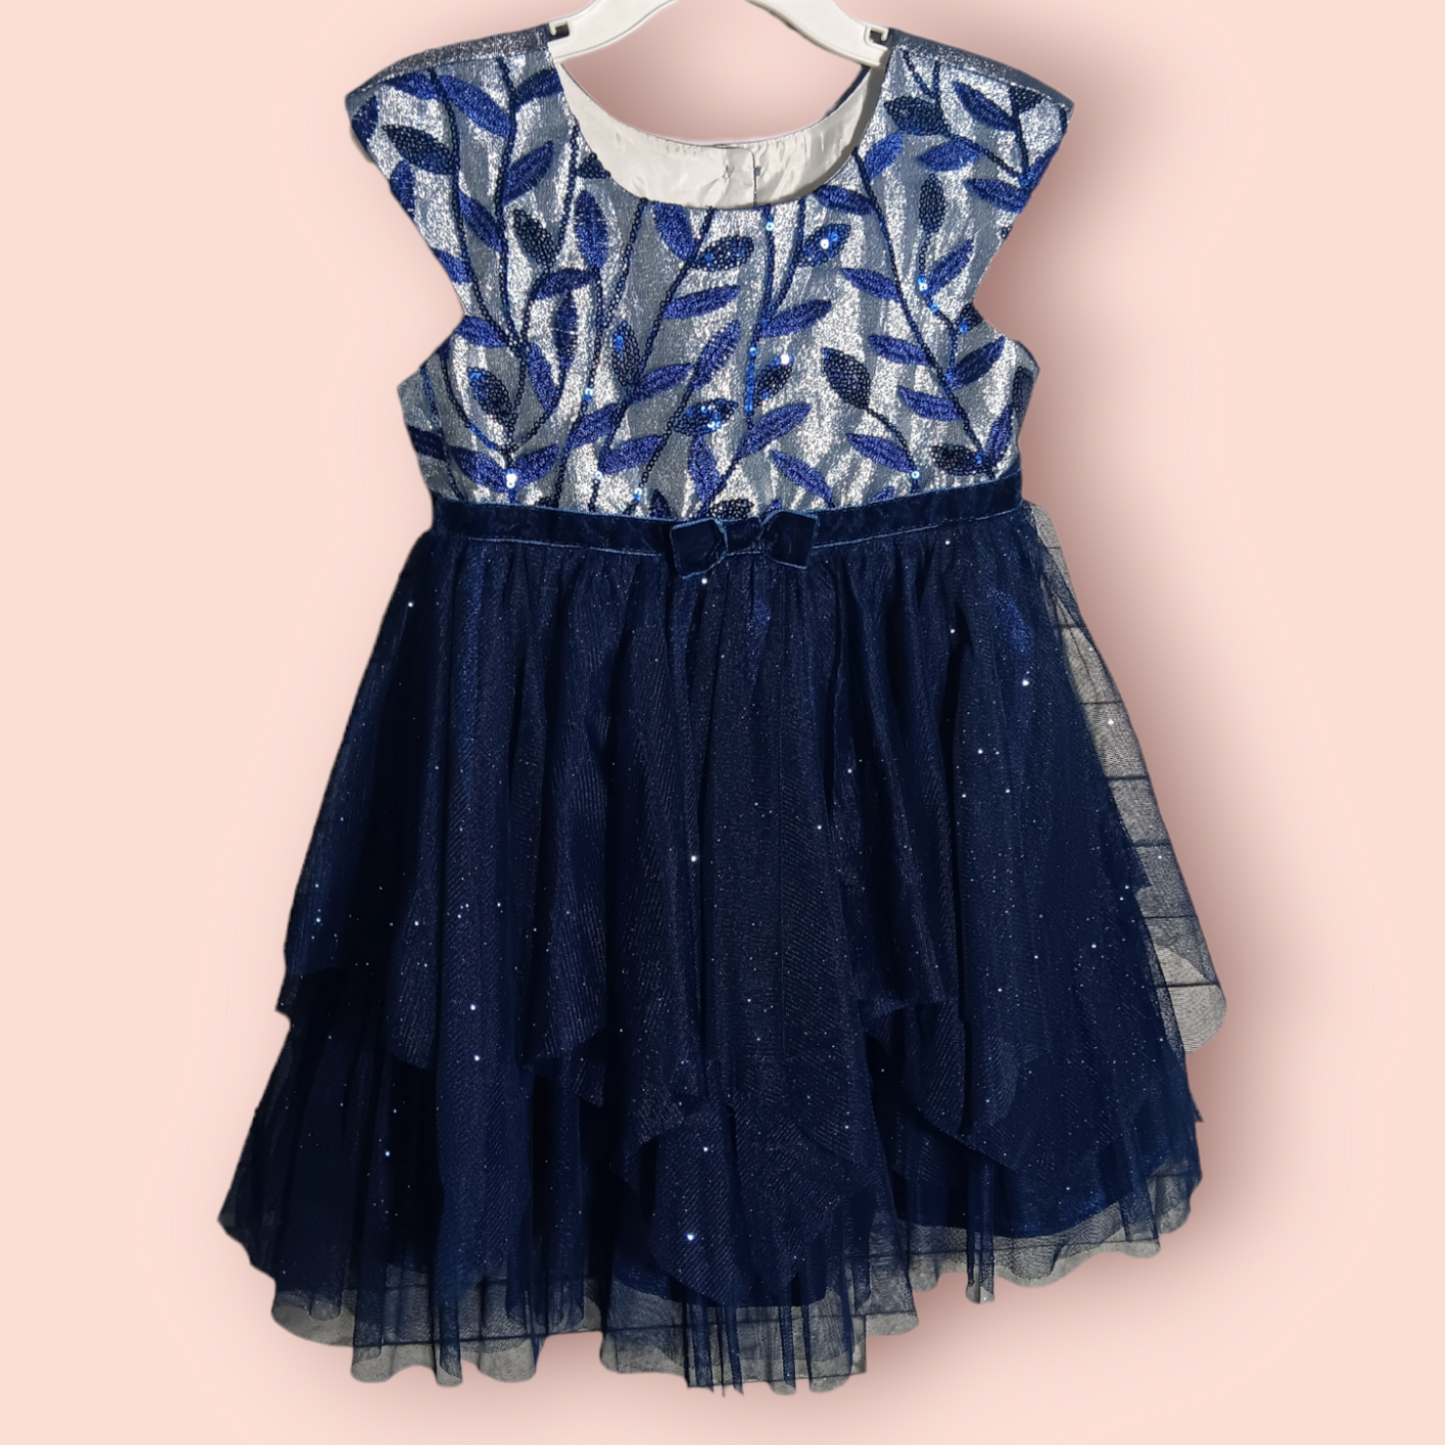 NWT Jona Michelle Dress Toddler Girls 3T Navy Blue Silver Holiday Christmas